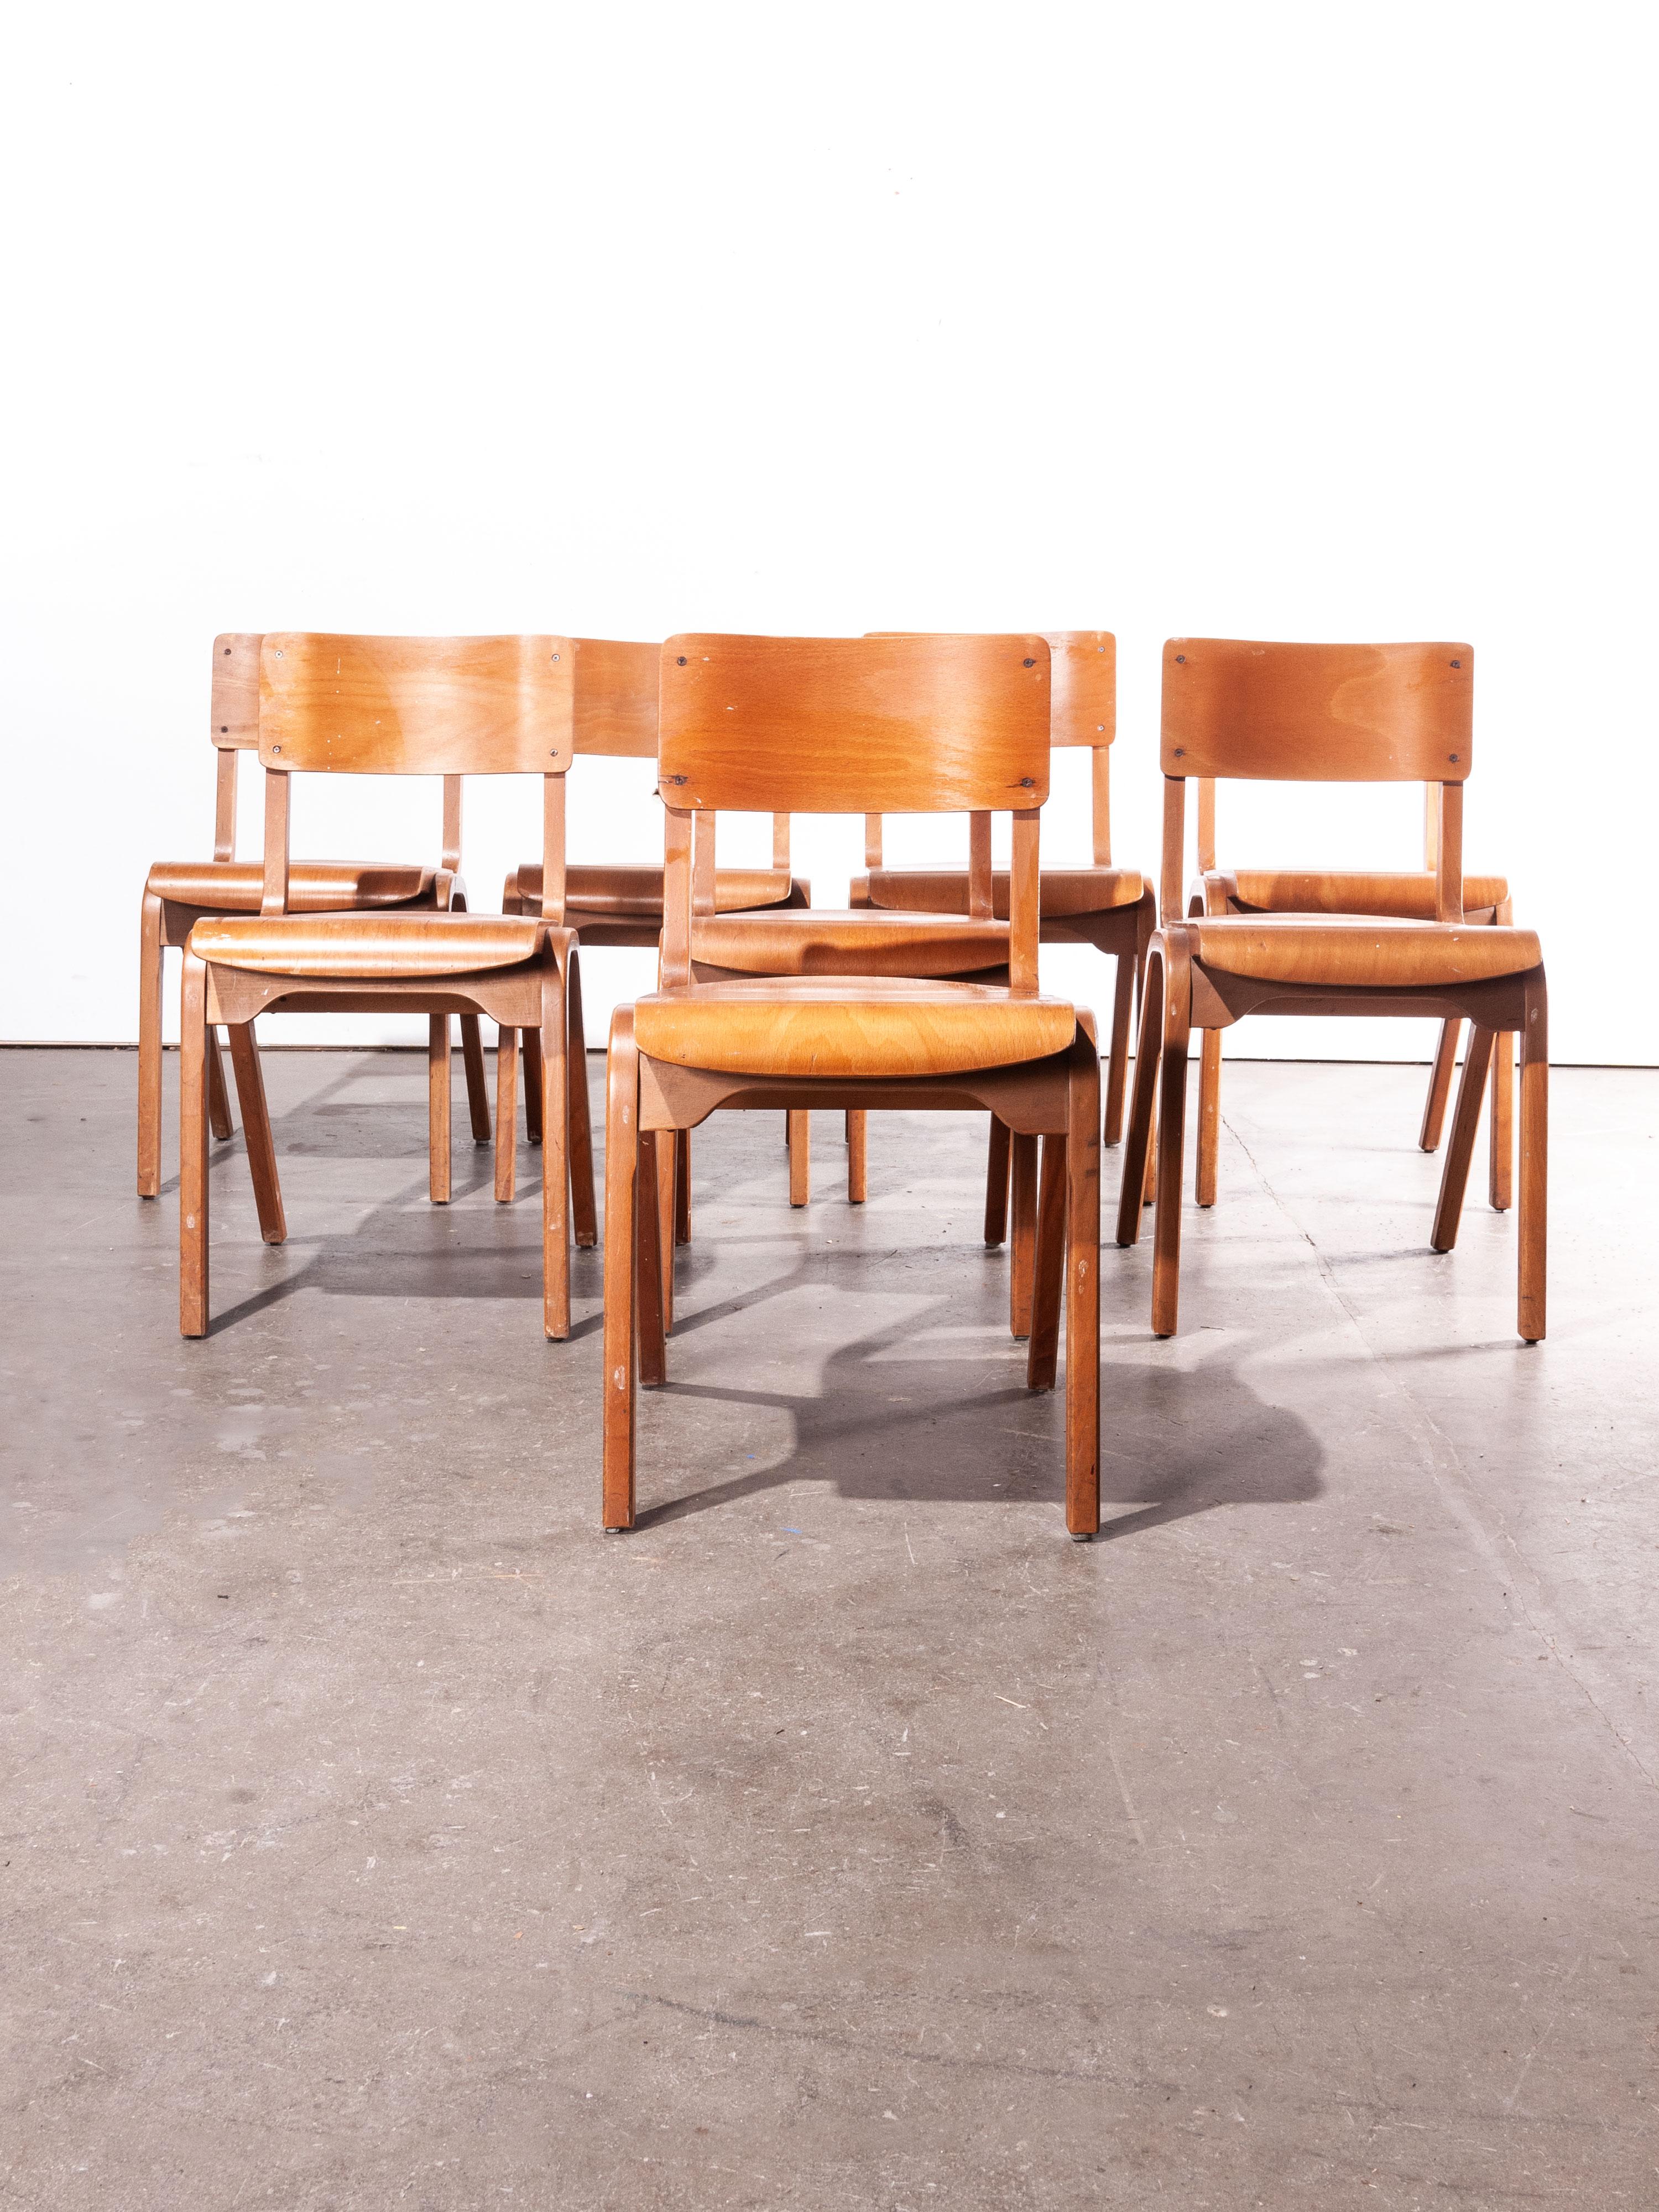 1950s stacking dining chairs by ESA James Leonard, Lamstak, set of eight, other quantities available

Set of eight 1950s rare vintage James Leonard ESA Esavian stacking dining chairs. This is one of our favourite model of chairs. Designed by James